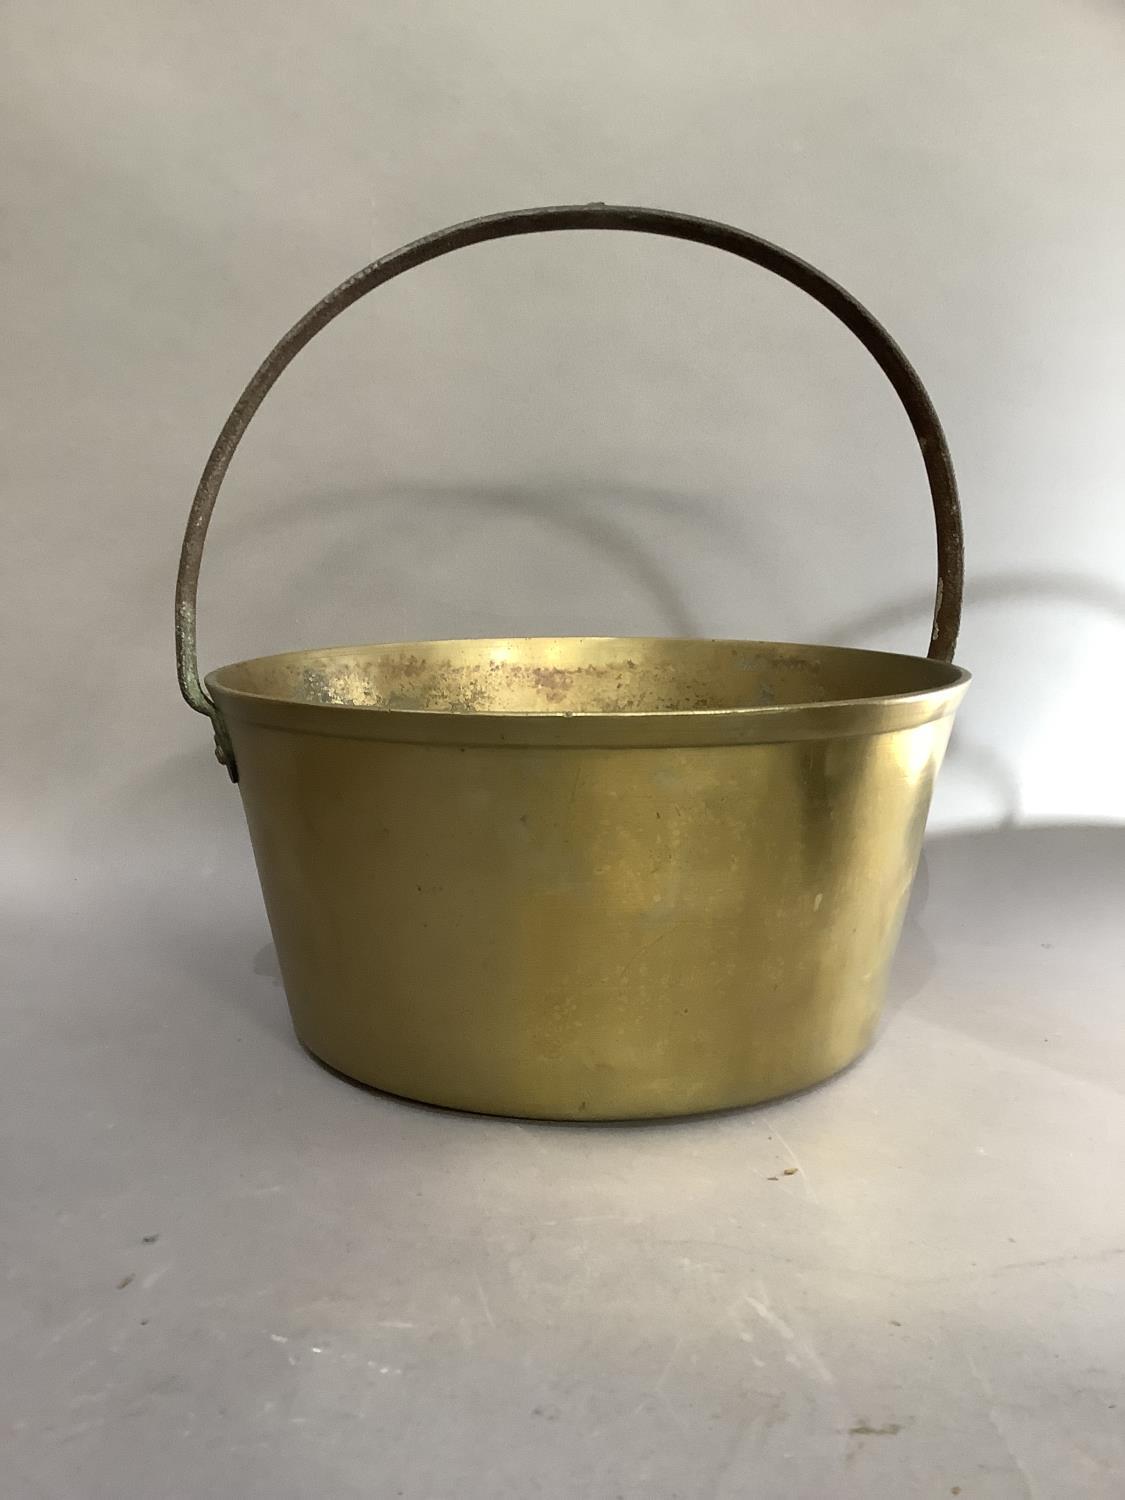 A large brass preserve pan with iron hoop handle, 32.5cm